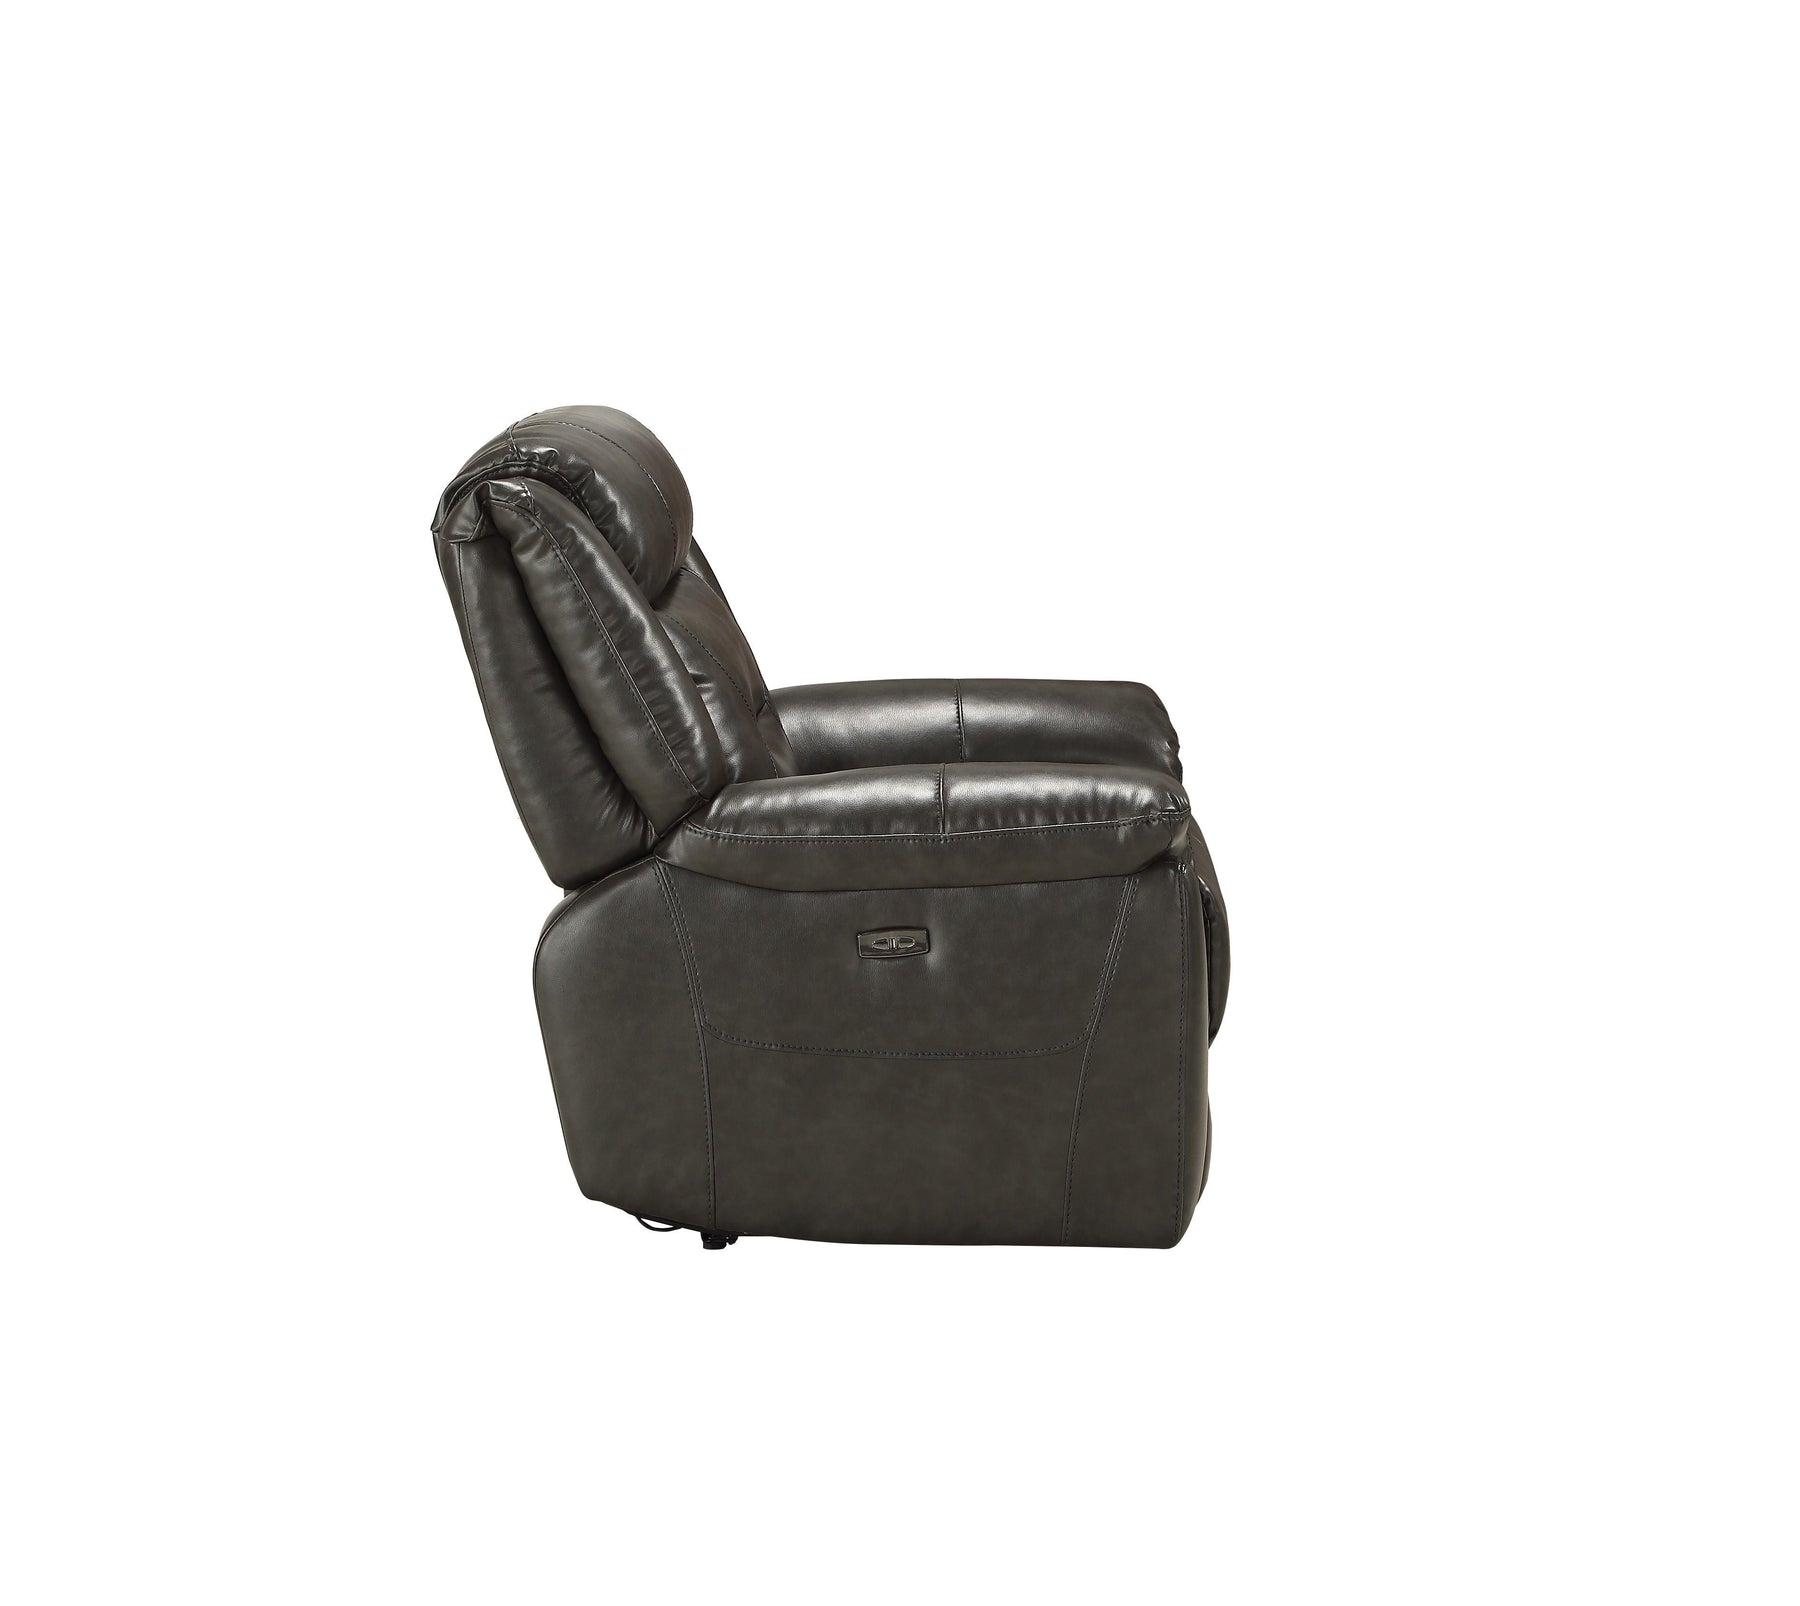 Imogen Gray Leather-Aire Recliner (Power Motion)  Half Price Furniture